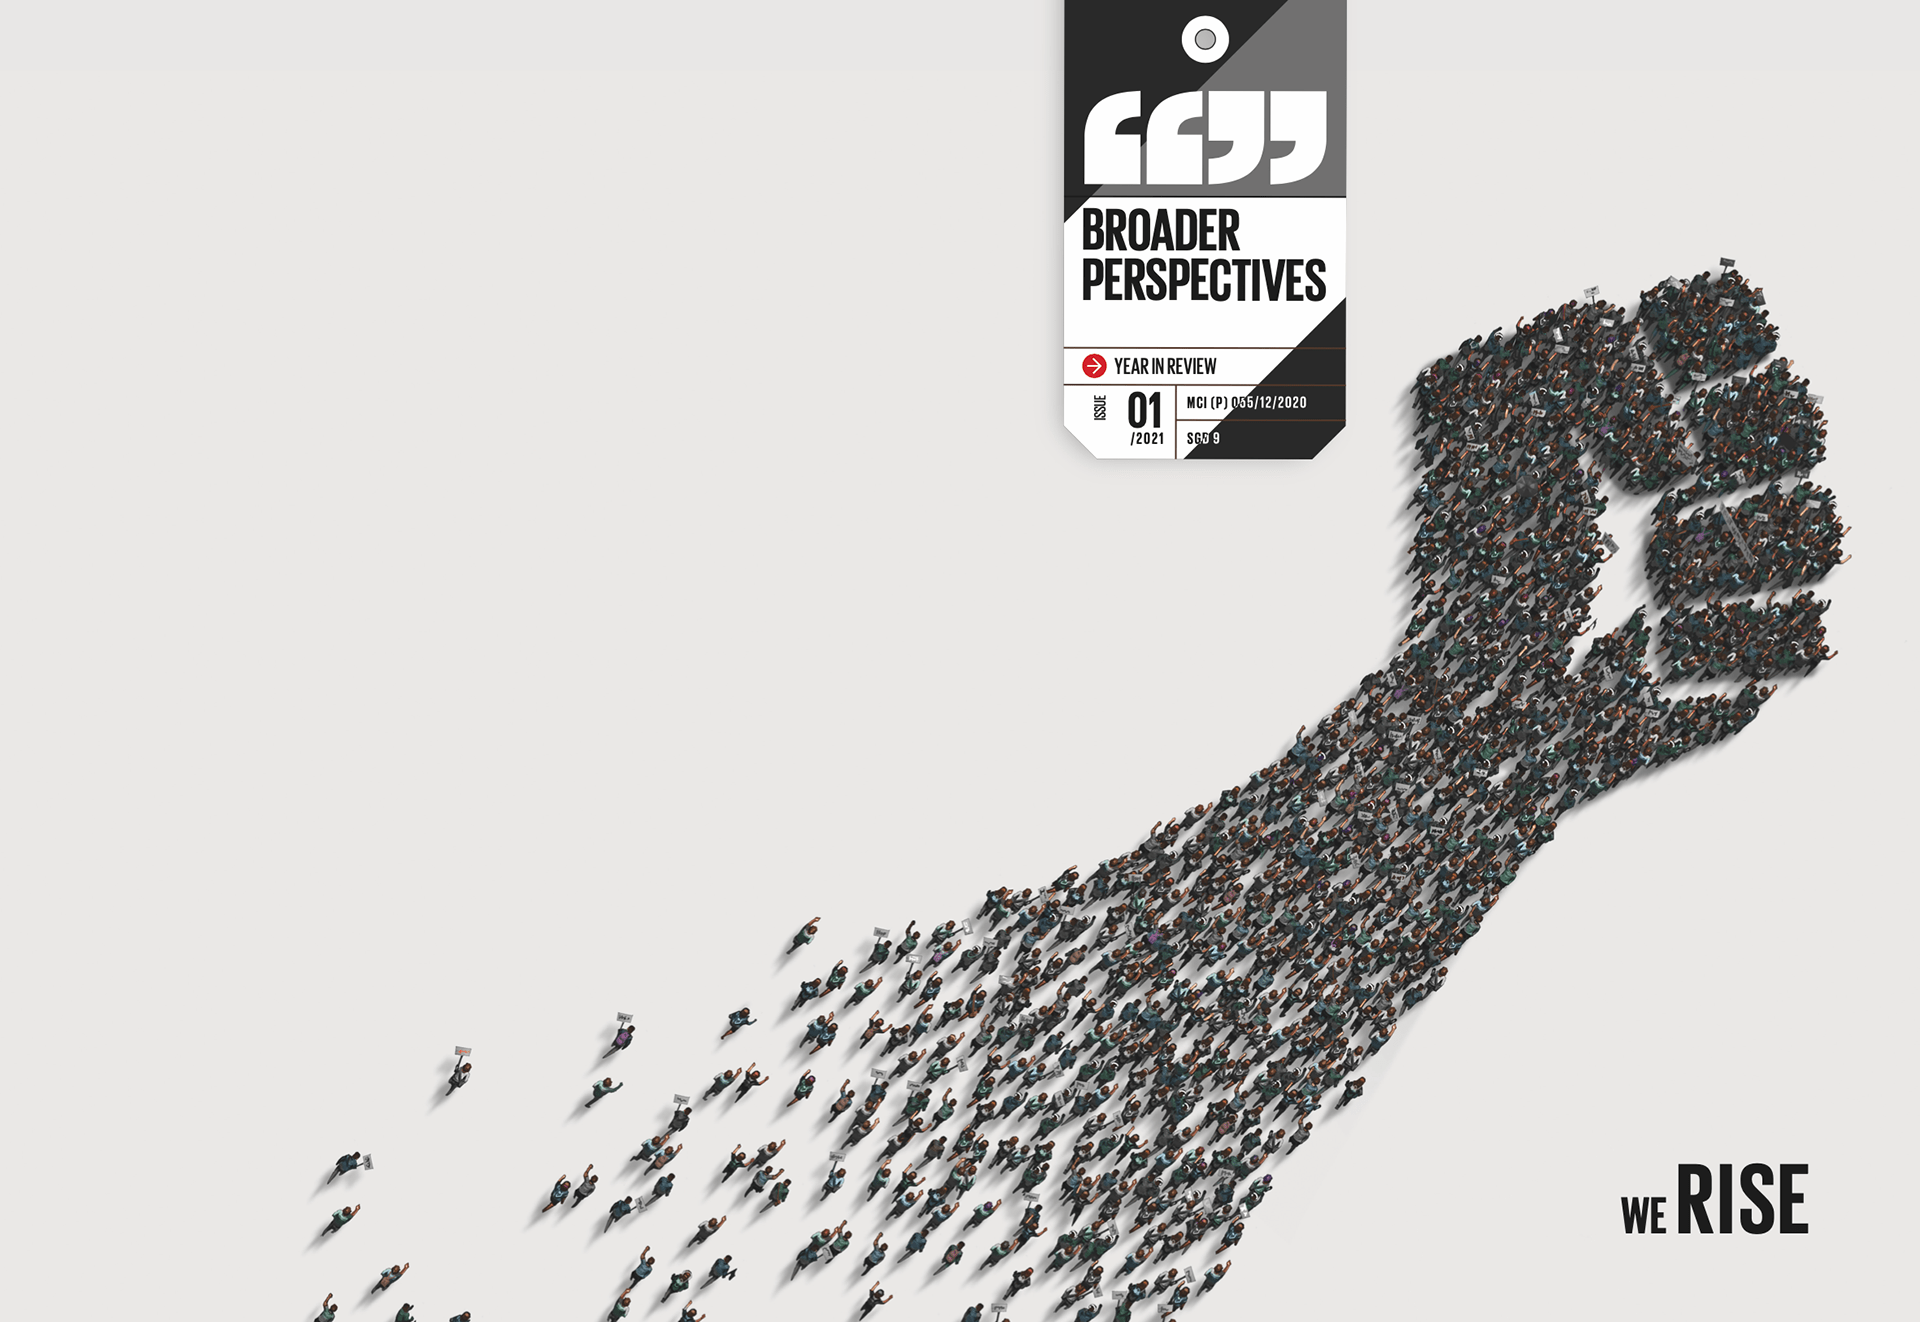 Design concept for the cover page: To highlight how we have all come together in hard times and crisis from the events in 2020, the cover of BP1 features the silhouette of a fist formed by a gathering of protestors that starts from the back cover of the magazine. Cover design: Thomas